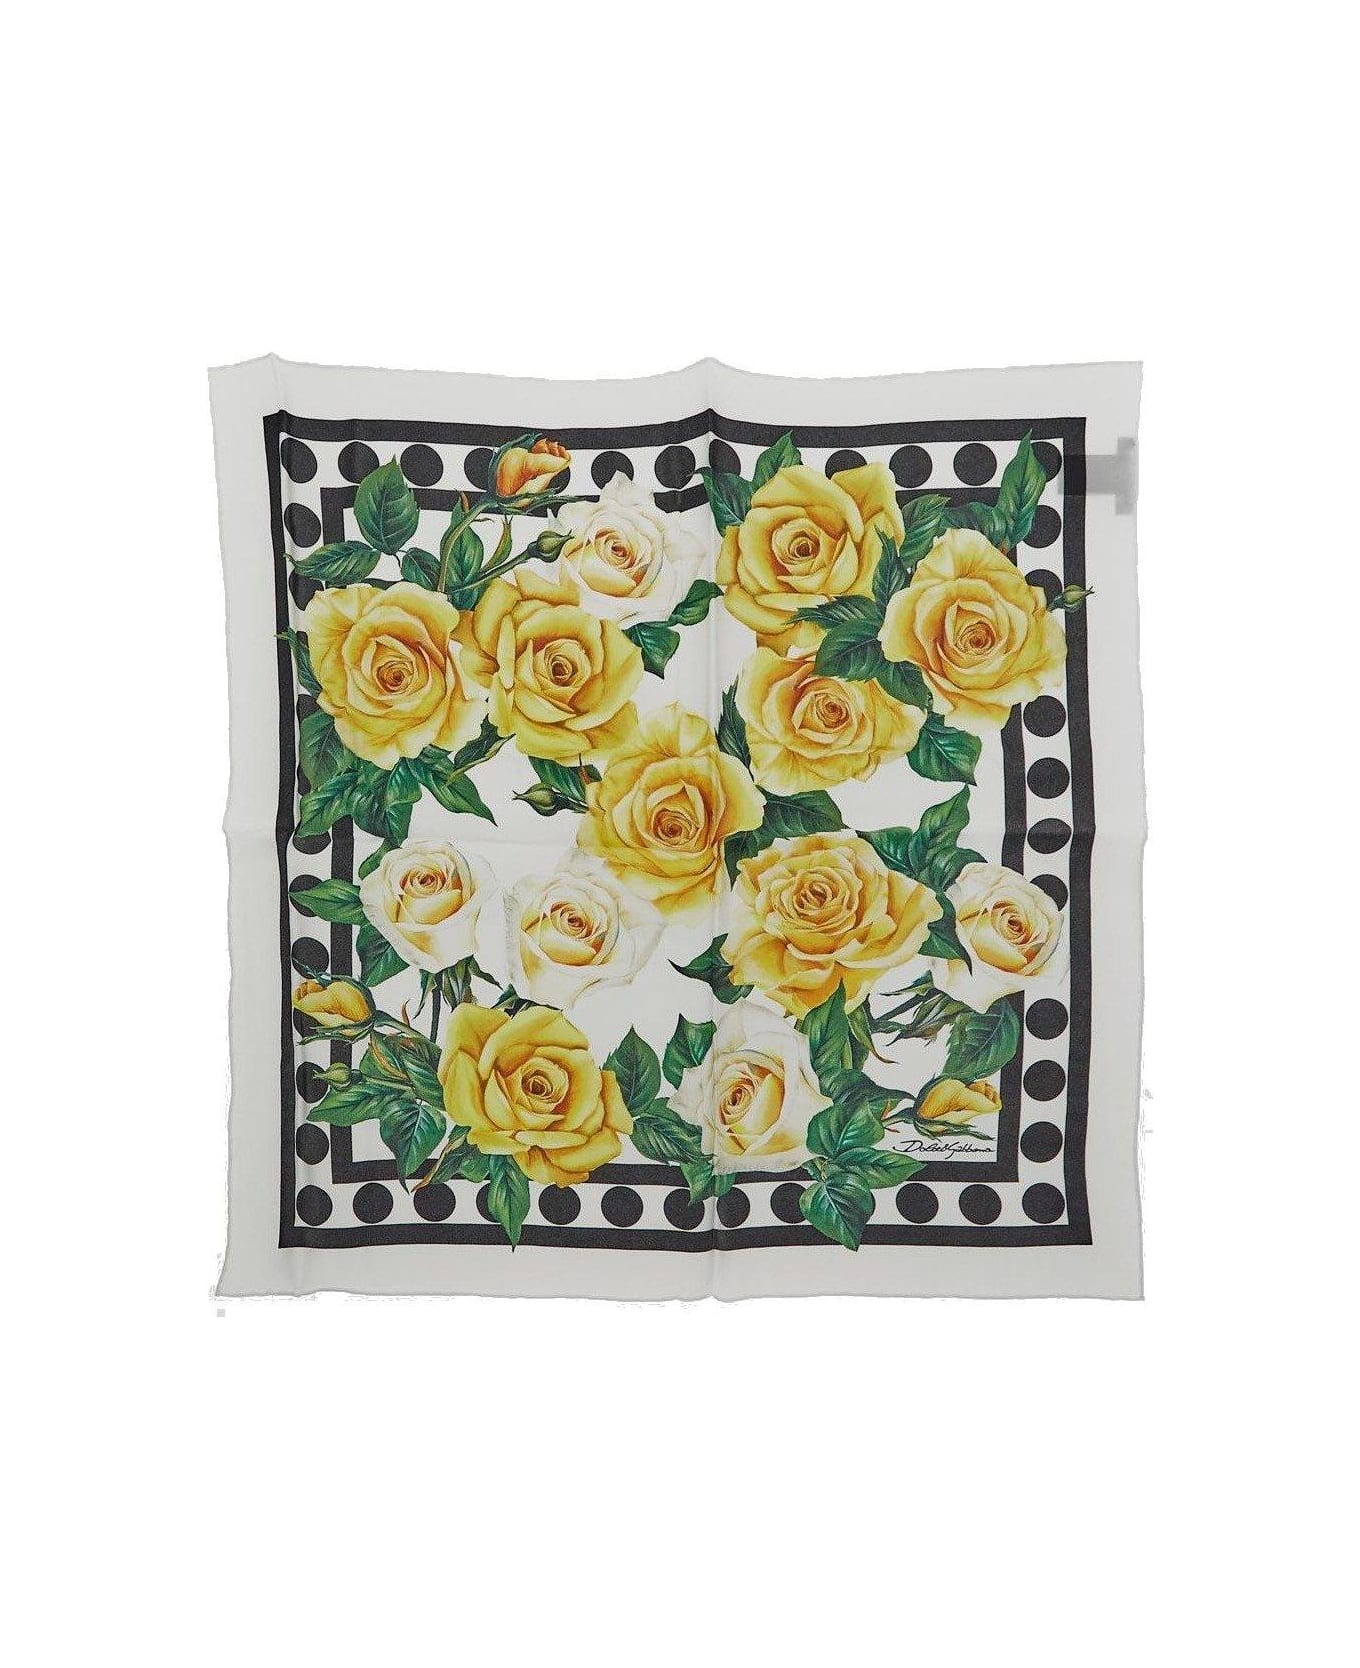 Dolce & Gabbana Floral Printed Square Scarf - Rose gialle fdo bco